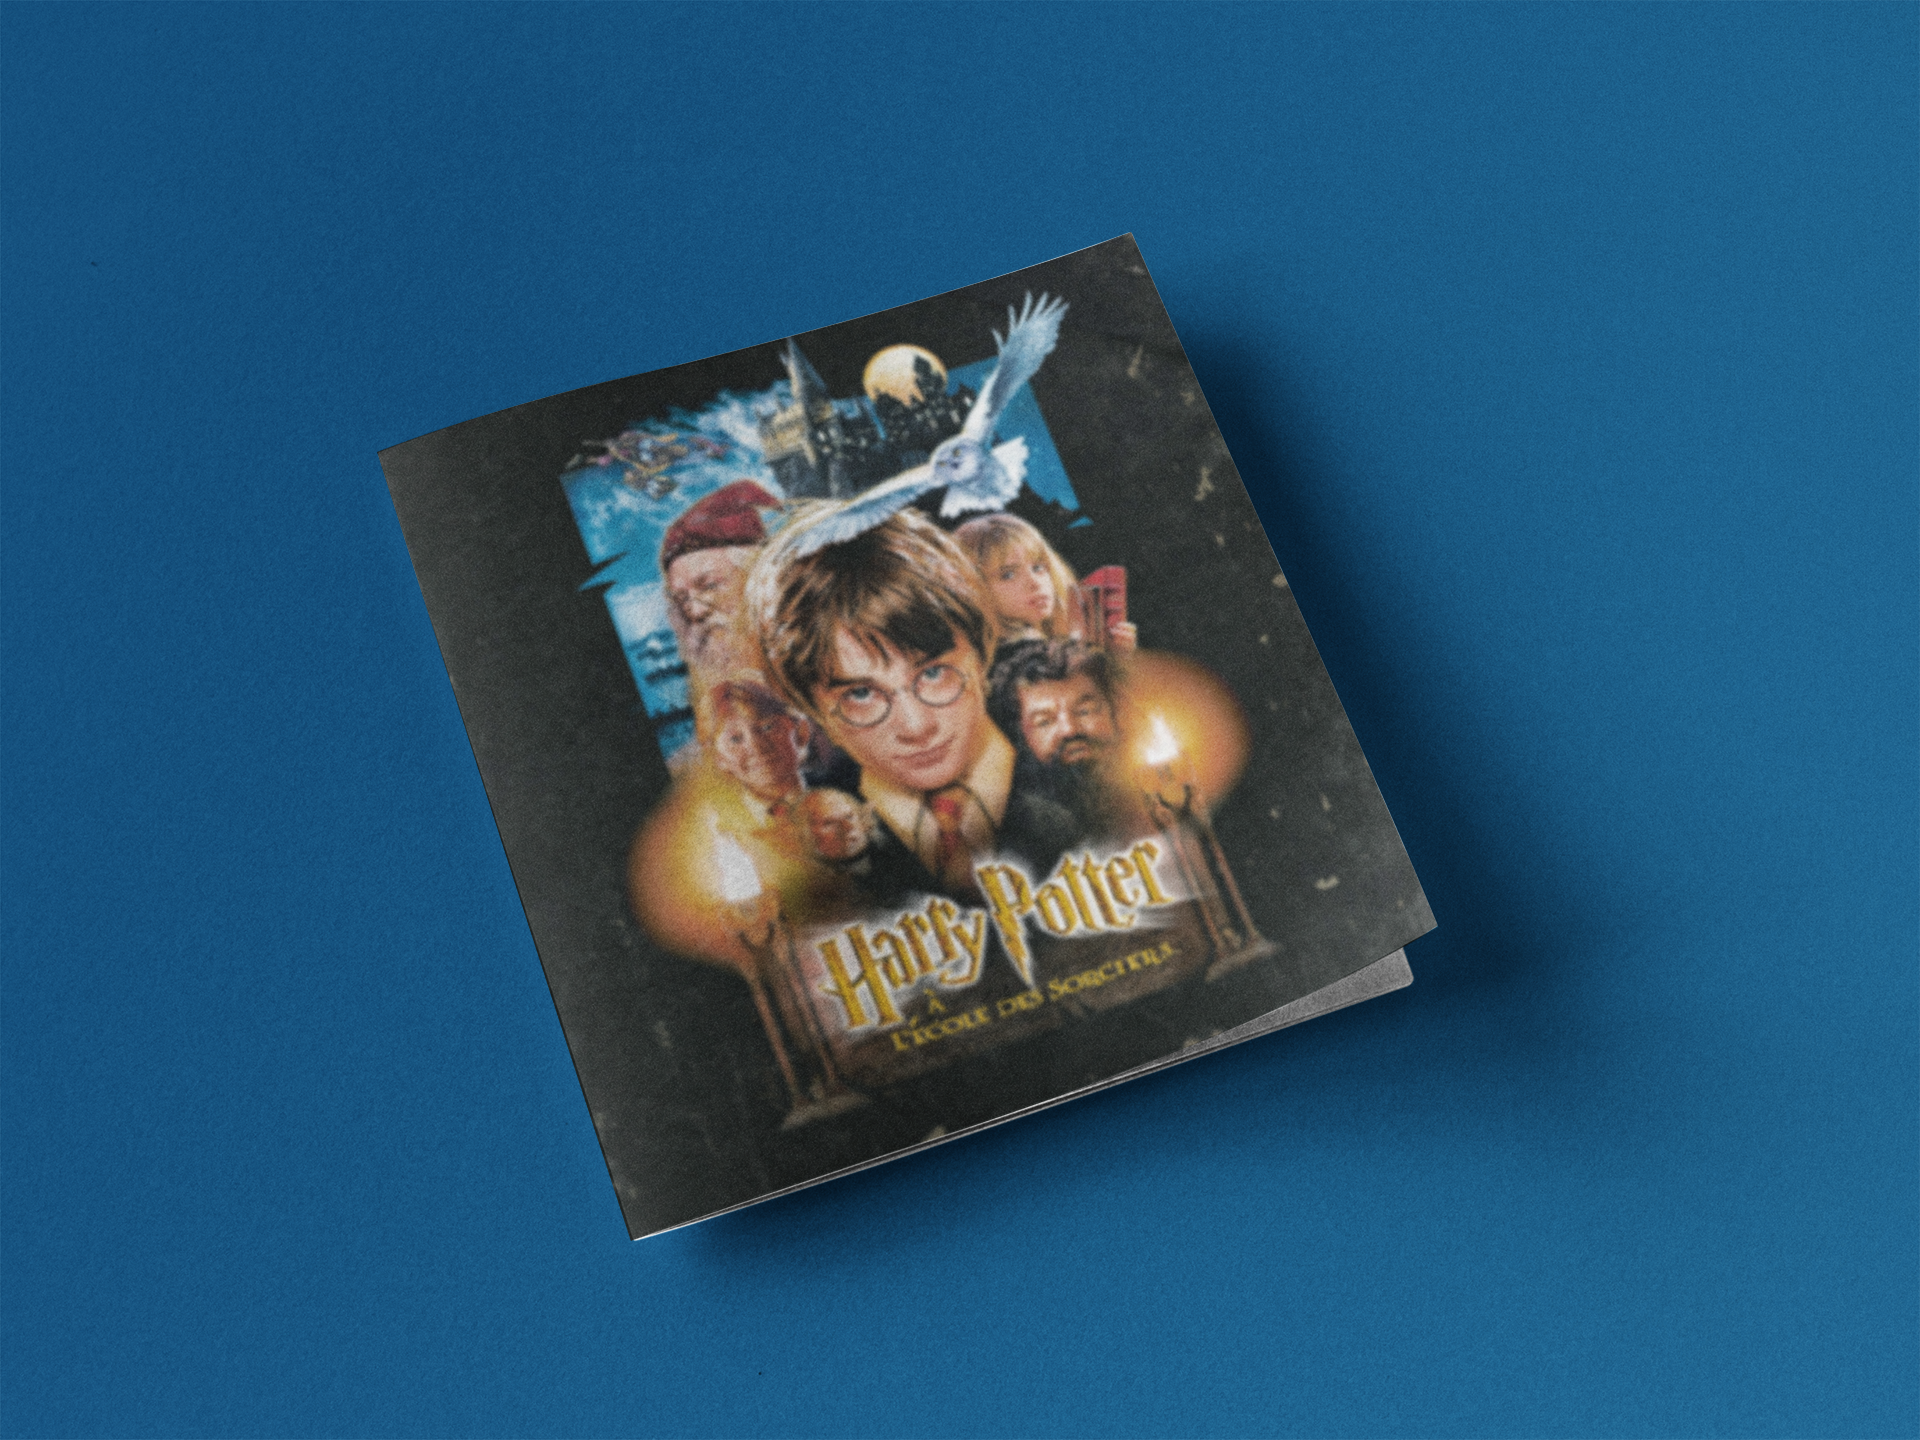 Harry Potter, Tome 1 : Harry Potter a l'ecole des sorciers (French edition  of Harry Potter and the Philosopher's Stone)